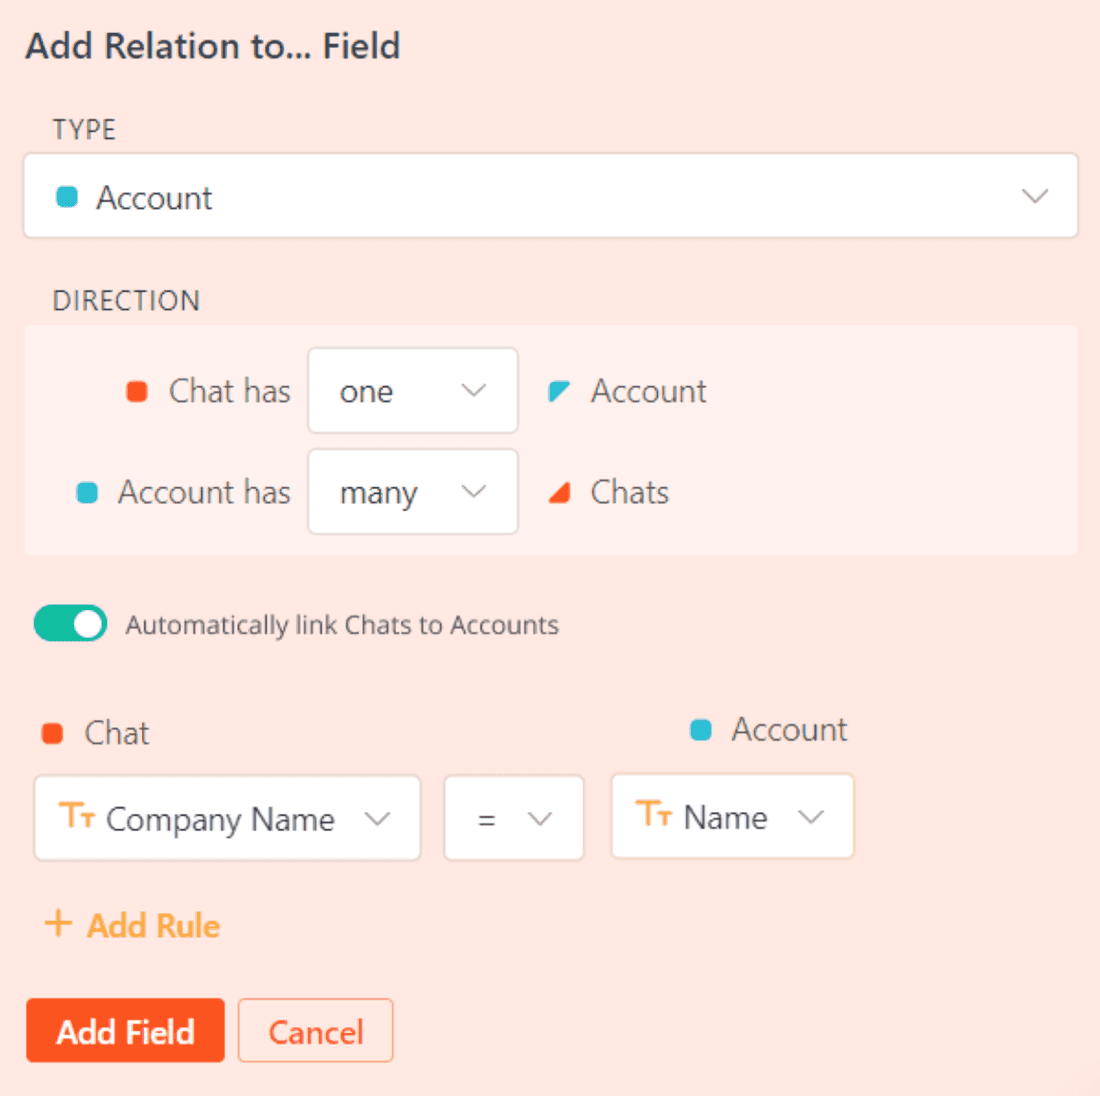 Set a relation between Chat and Account based on a rule